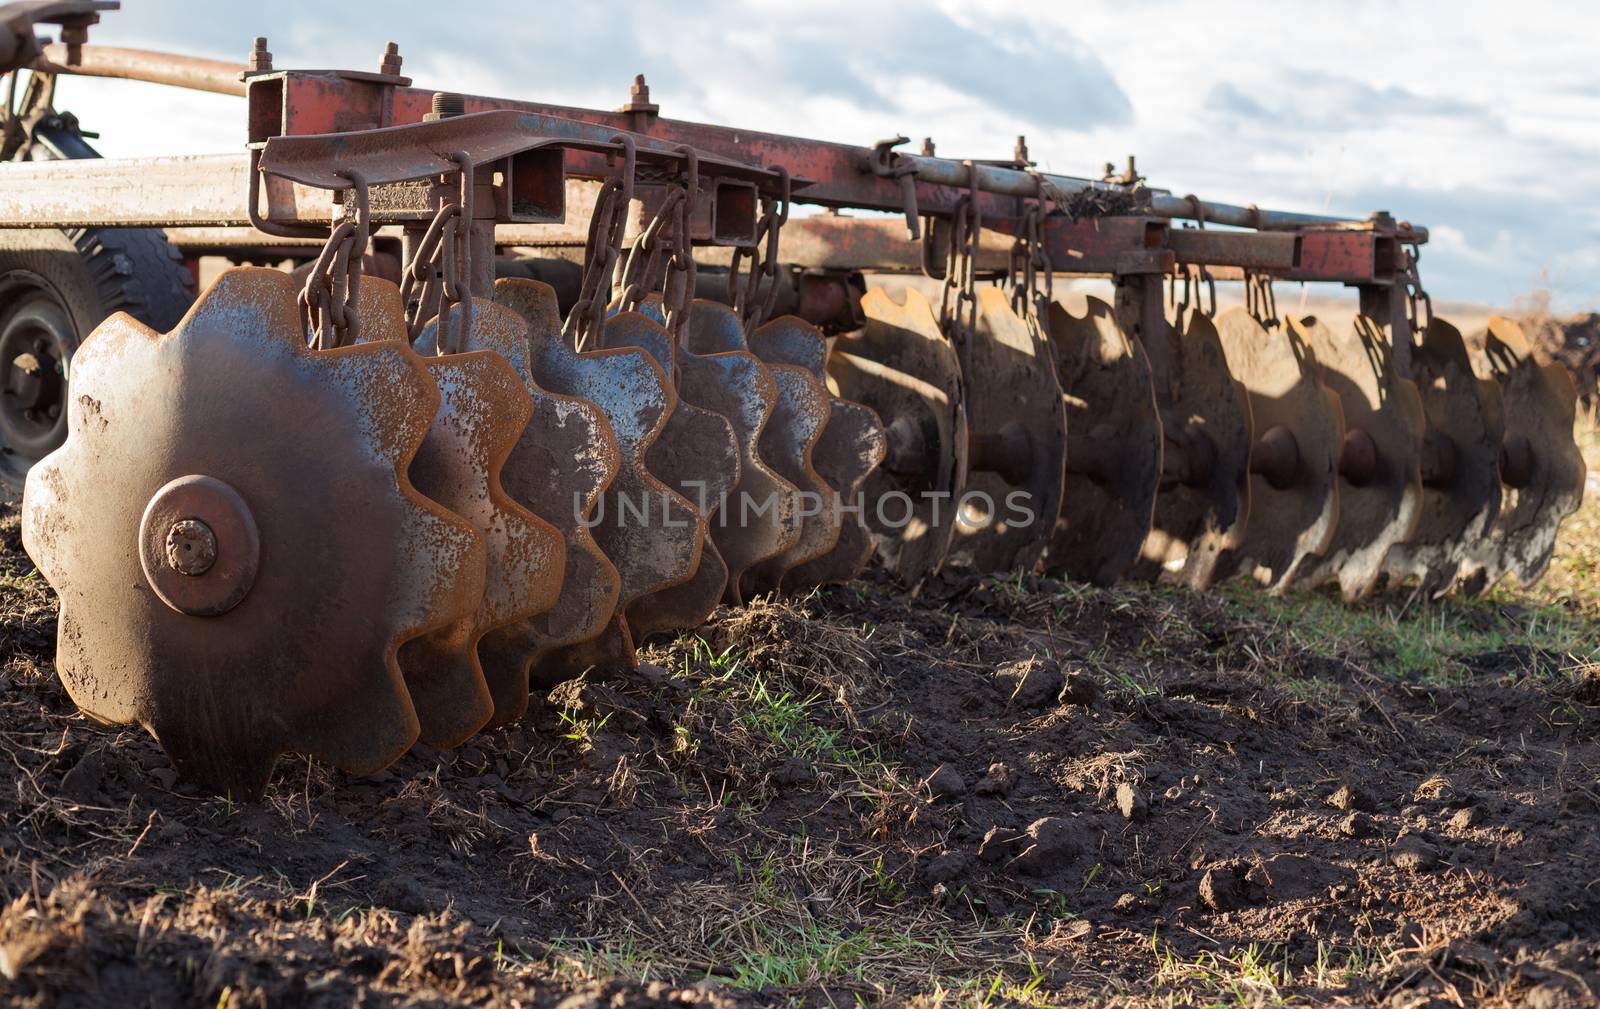 Disc harrow used to cultivate the soil. Close up.